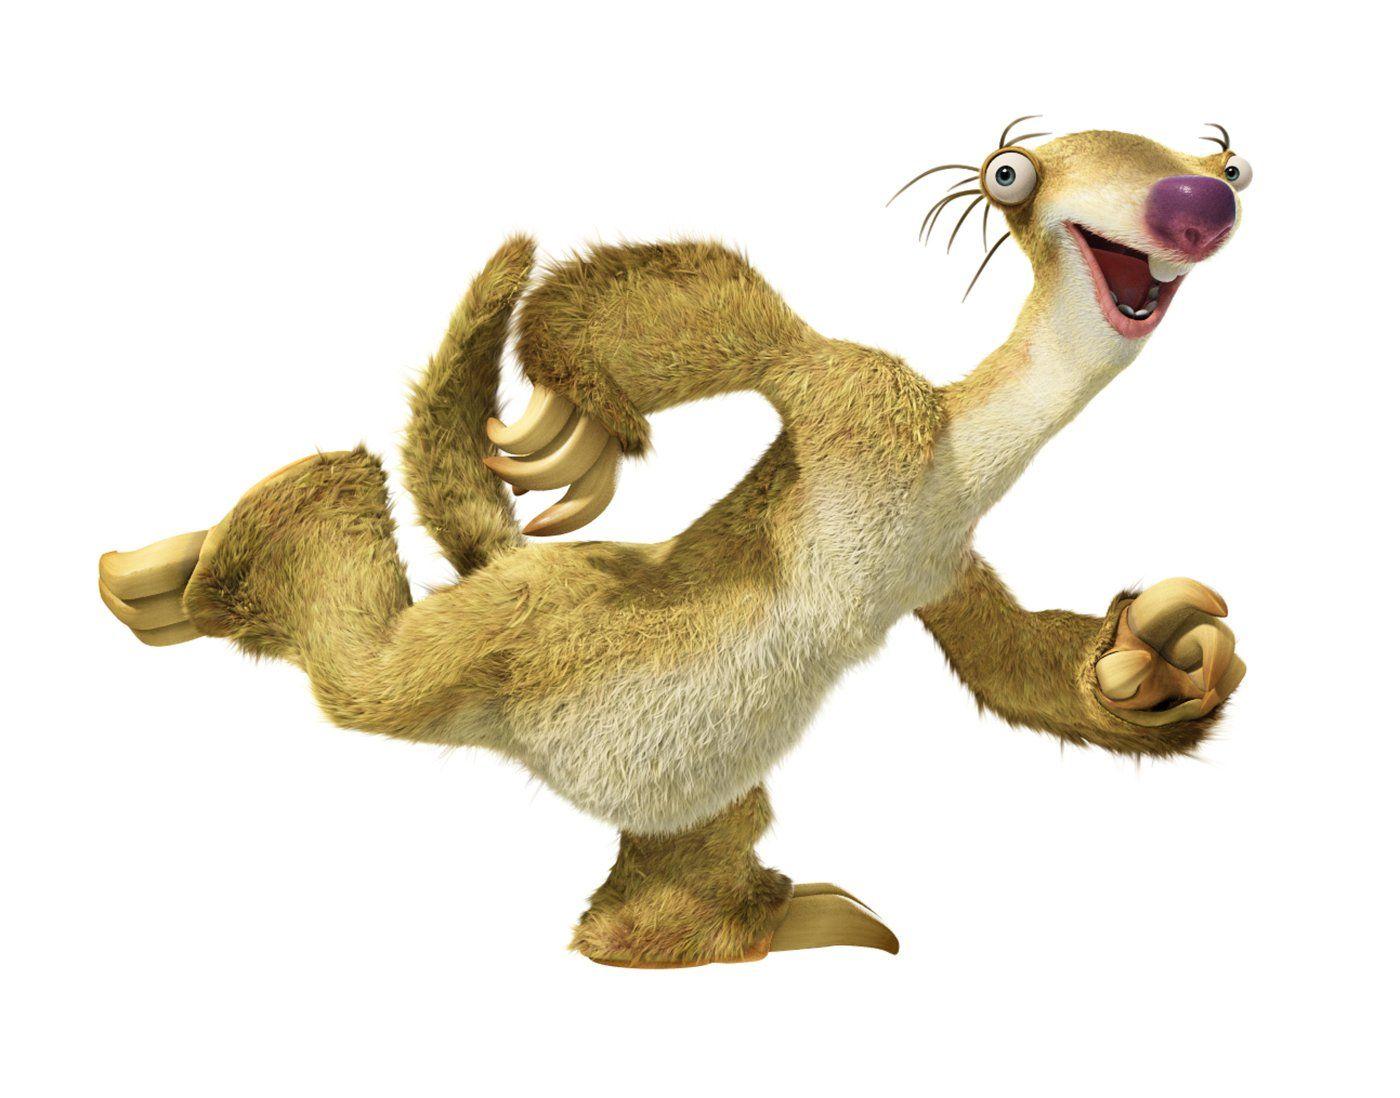 People who look like sid the sloth from ice age. 